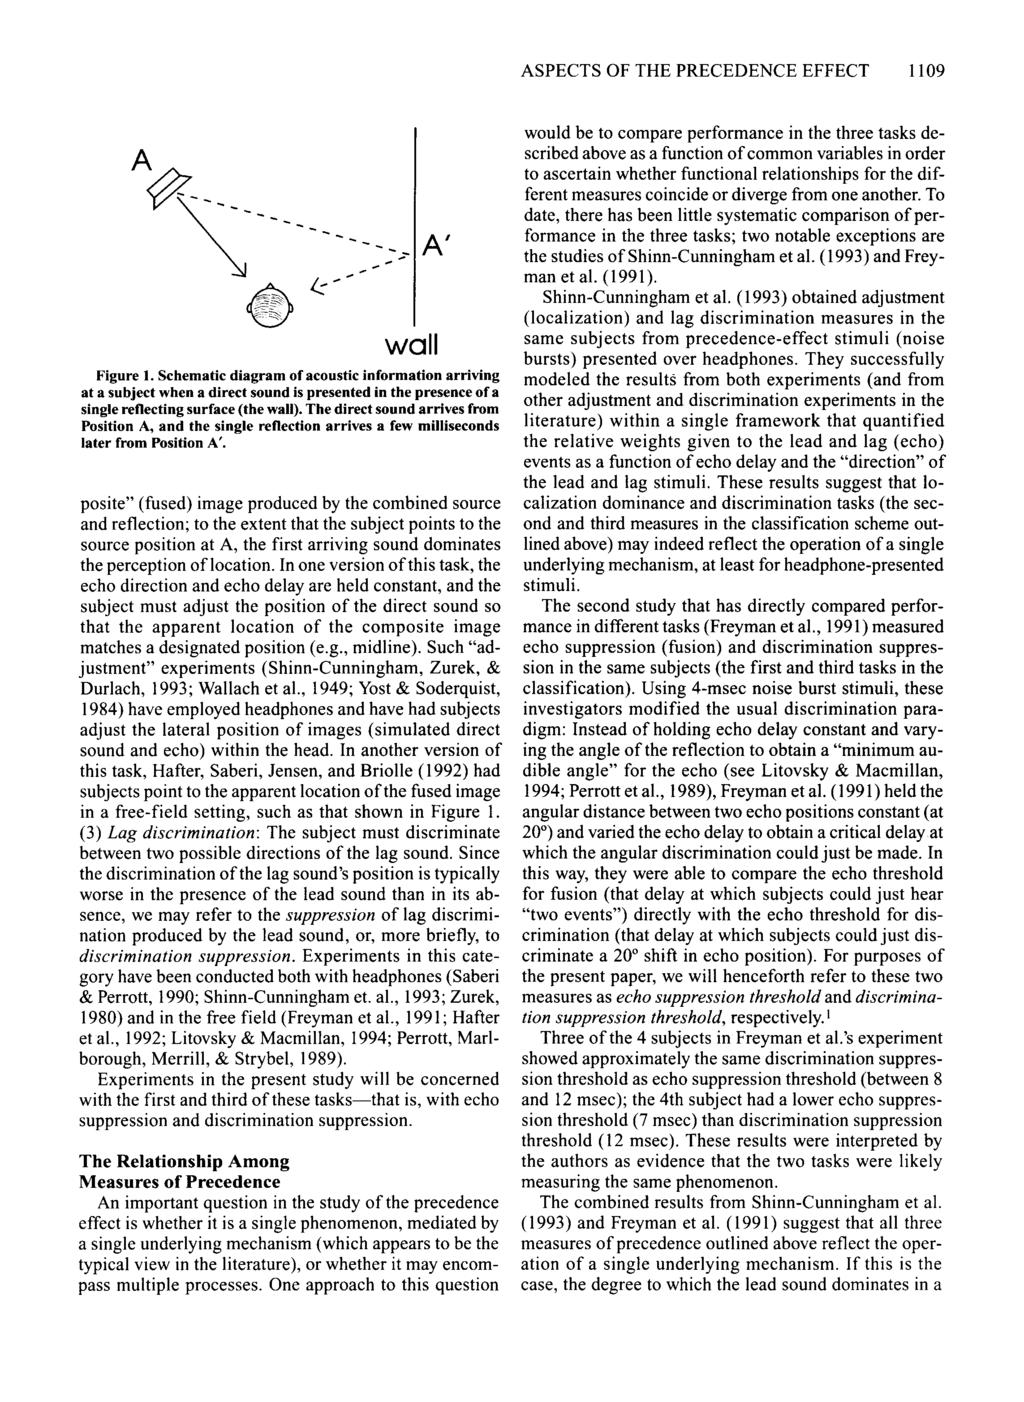 ASPECTS OF THE PRECEDENCE EFFECT 1109 wall Figure 1.